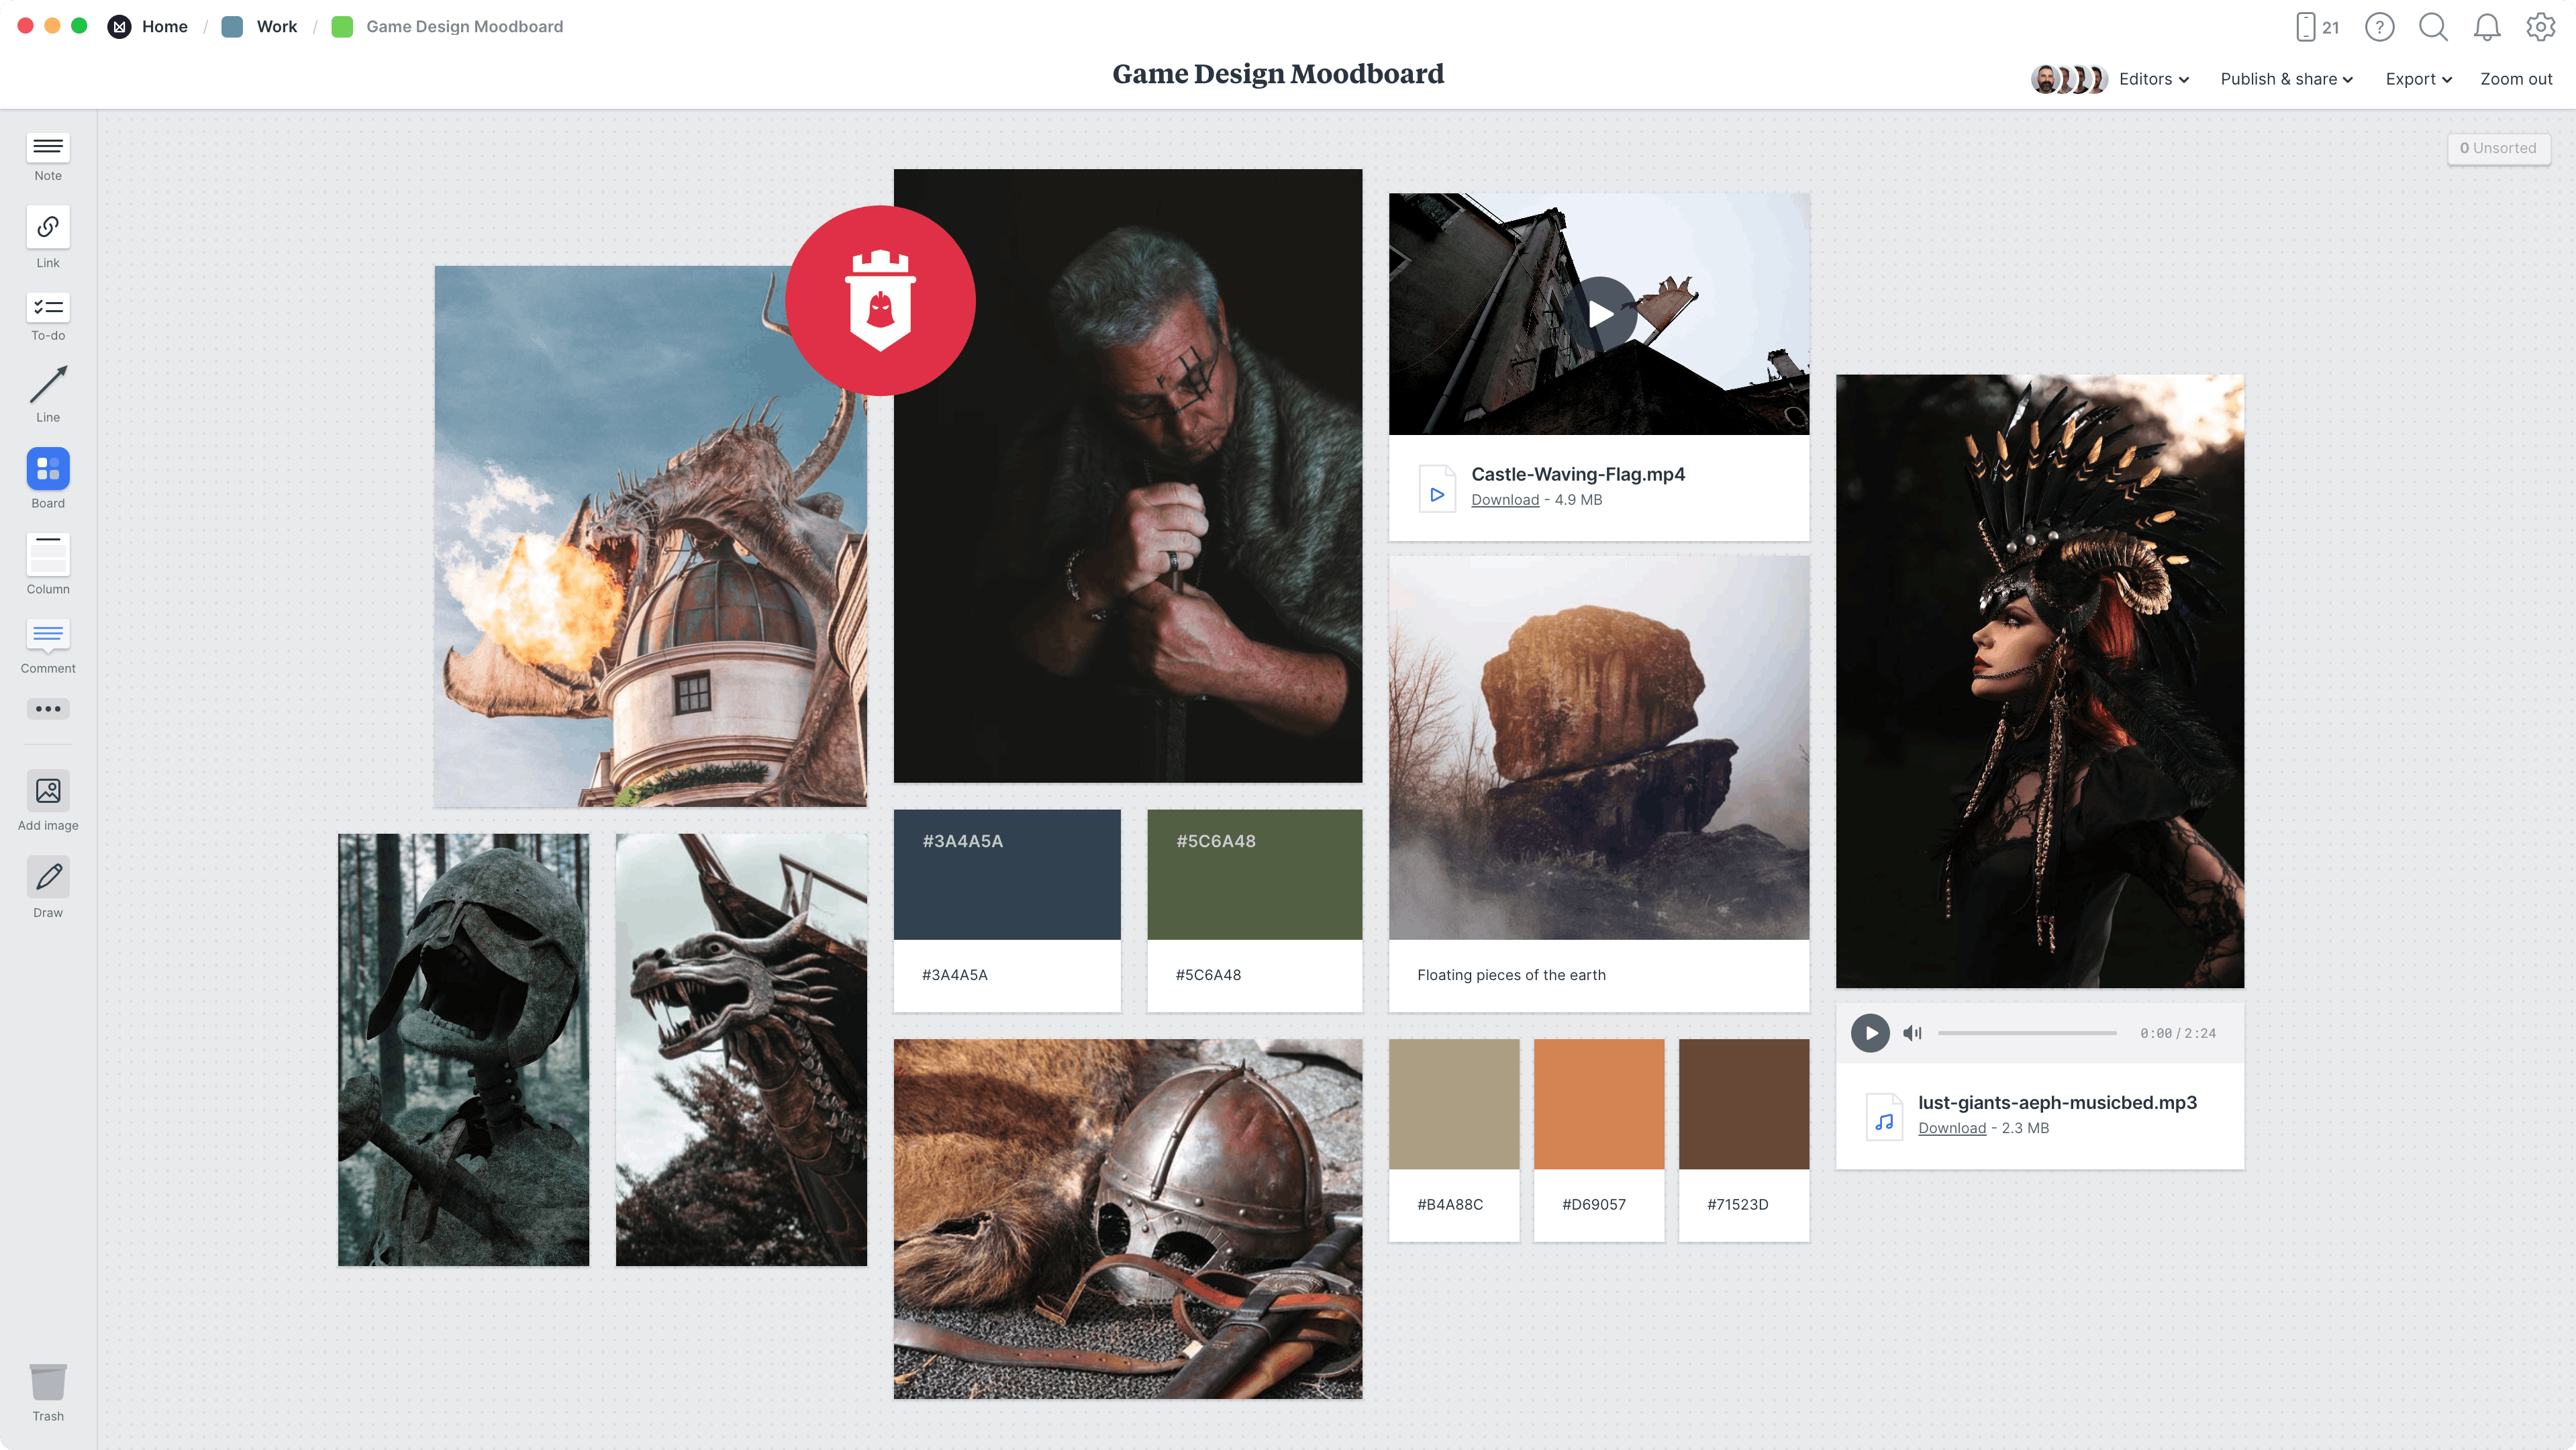 Game Design Moodboard Template, within the Milanote app